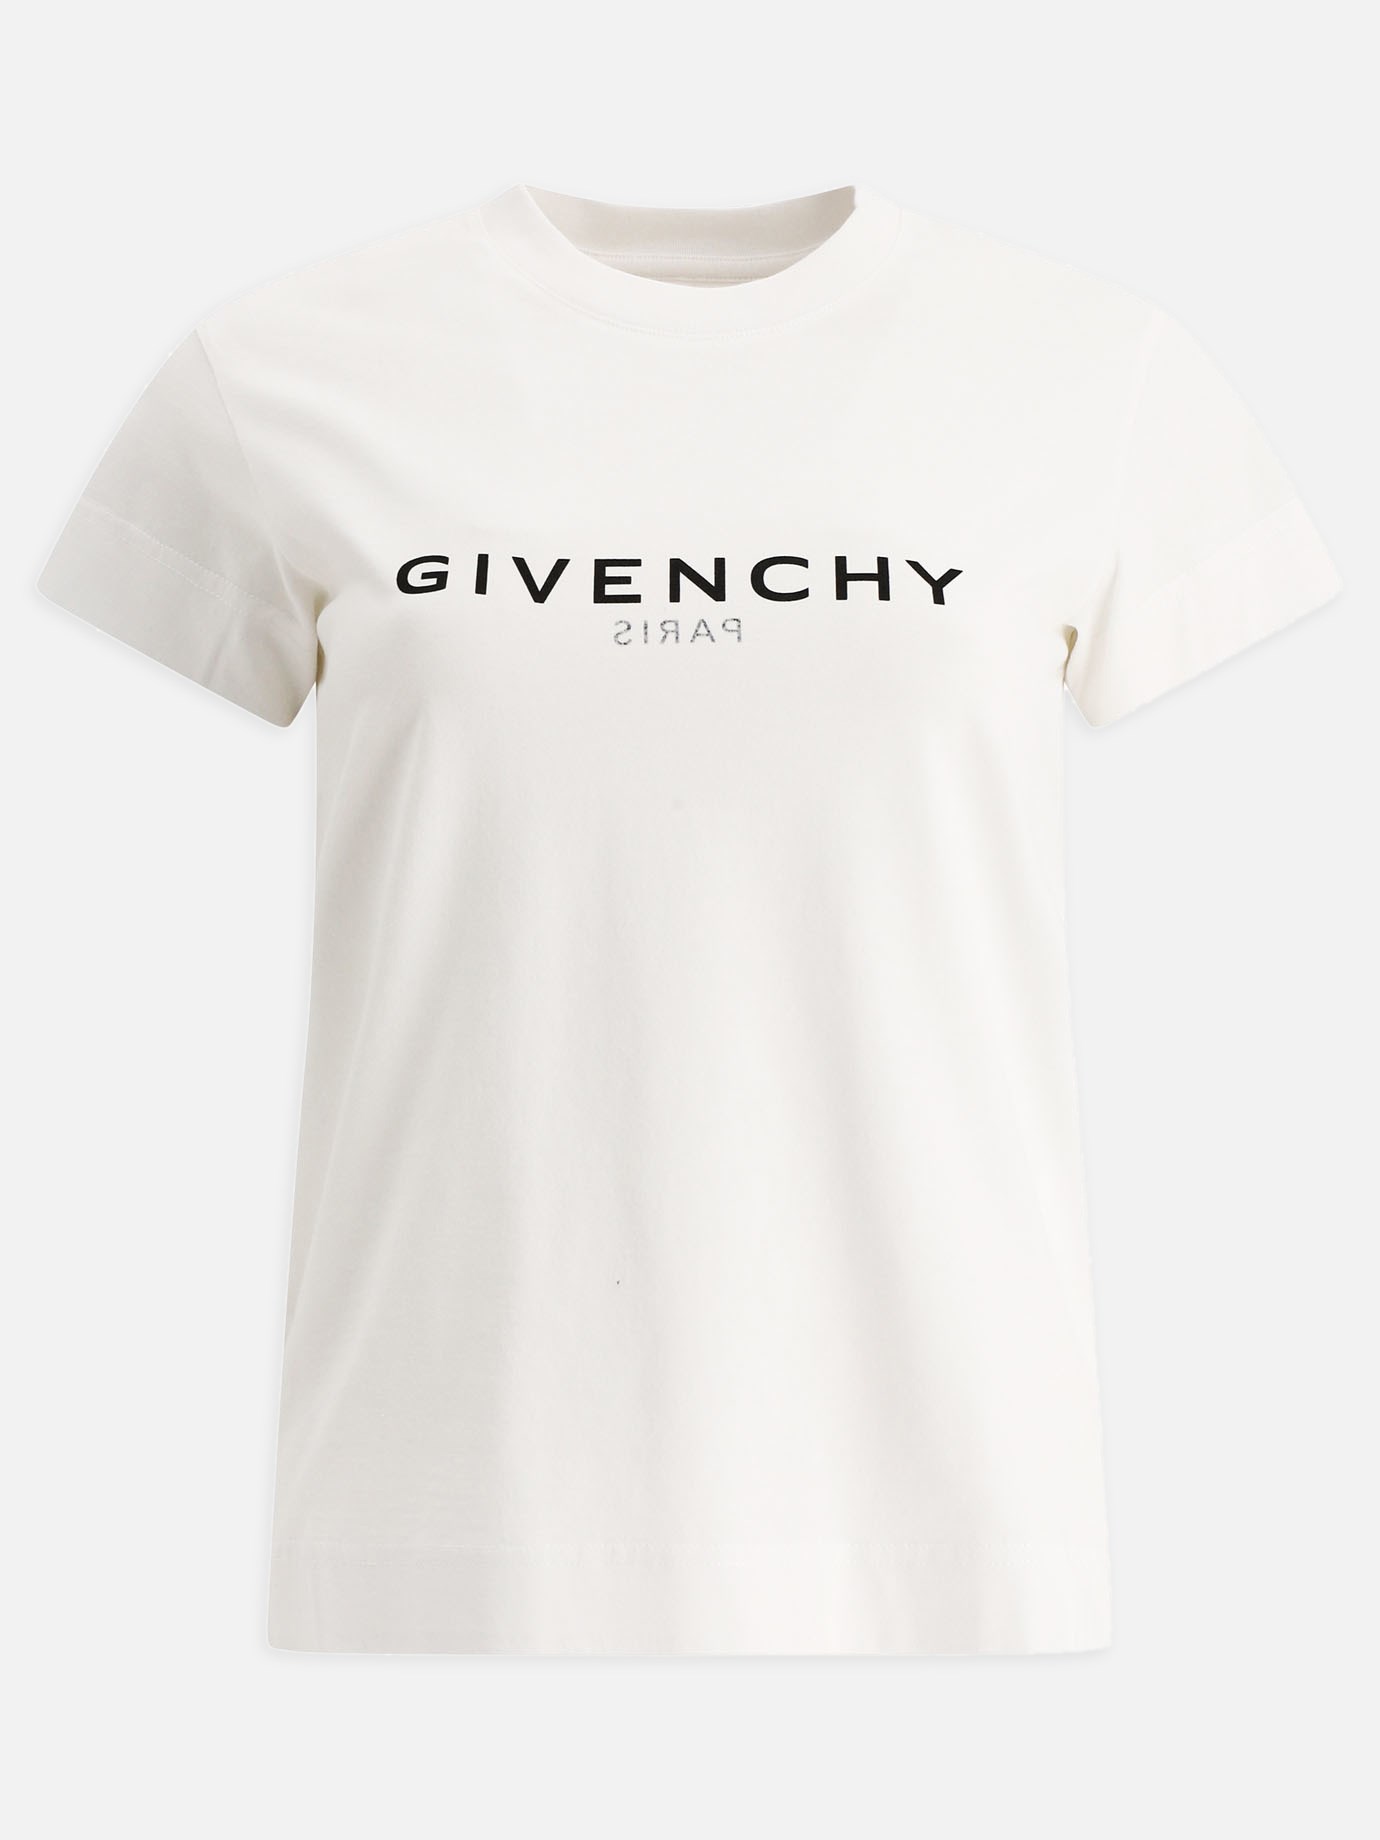  Givenchy Reverse  t-shirtby Givenchy - 3